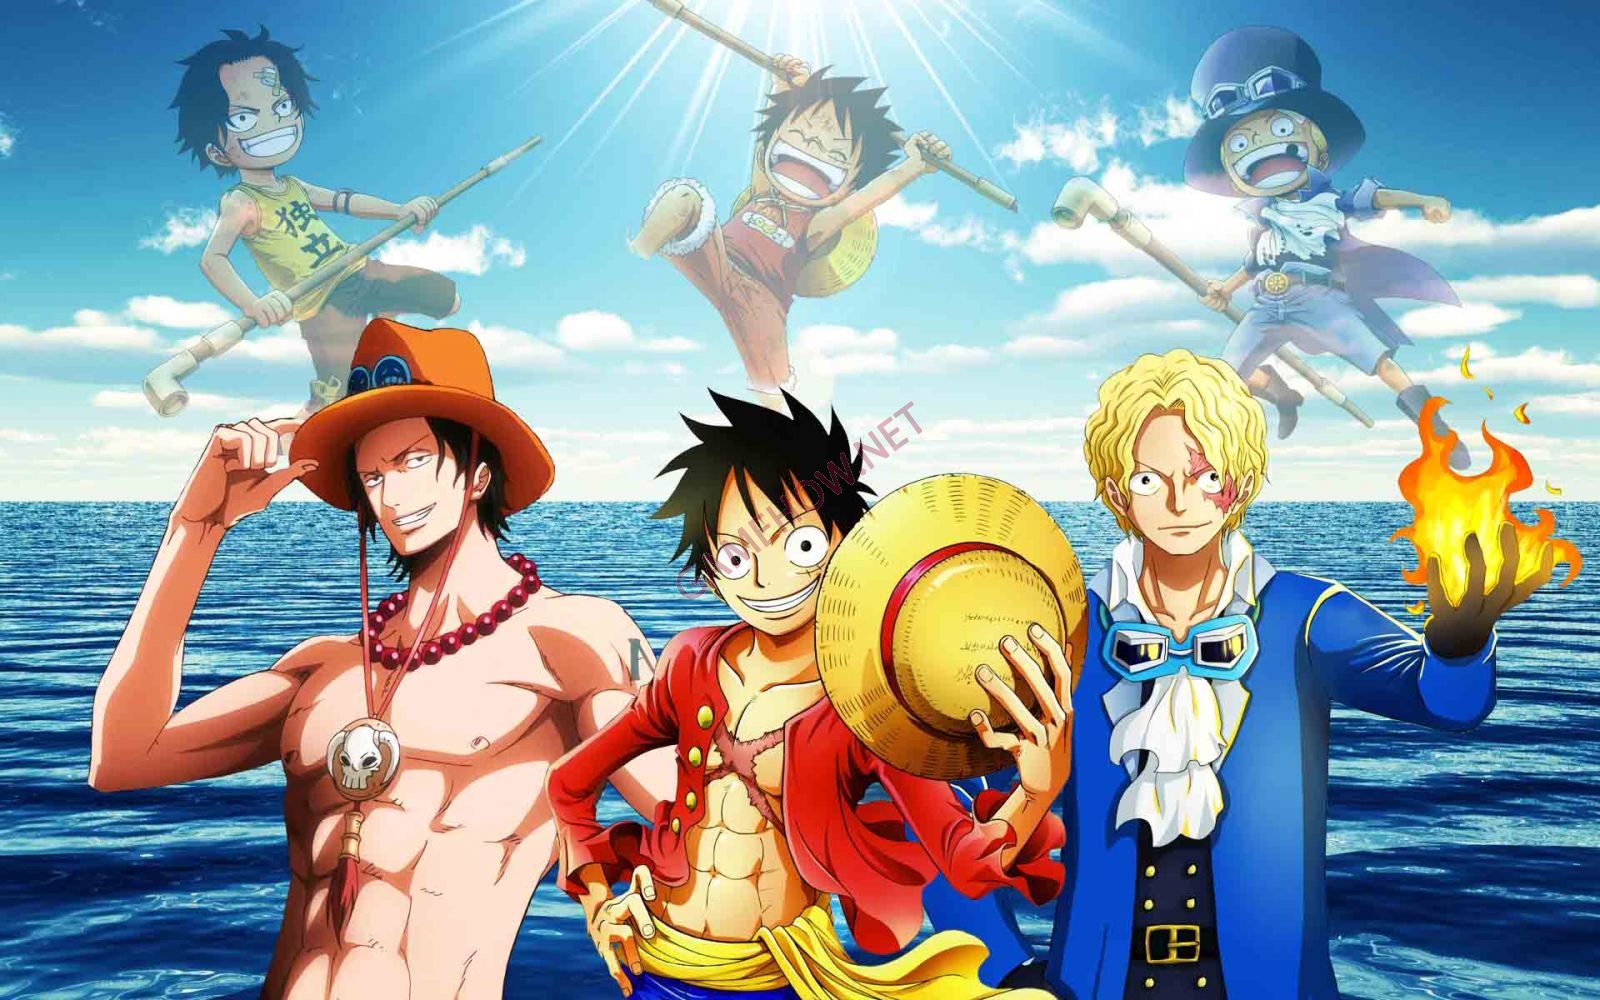 anh luffy chat luong 4k 5 gamede net 2 GAME DỄ